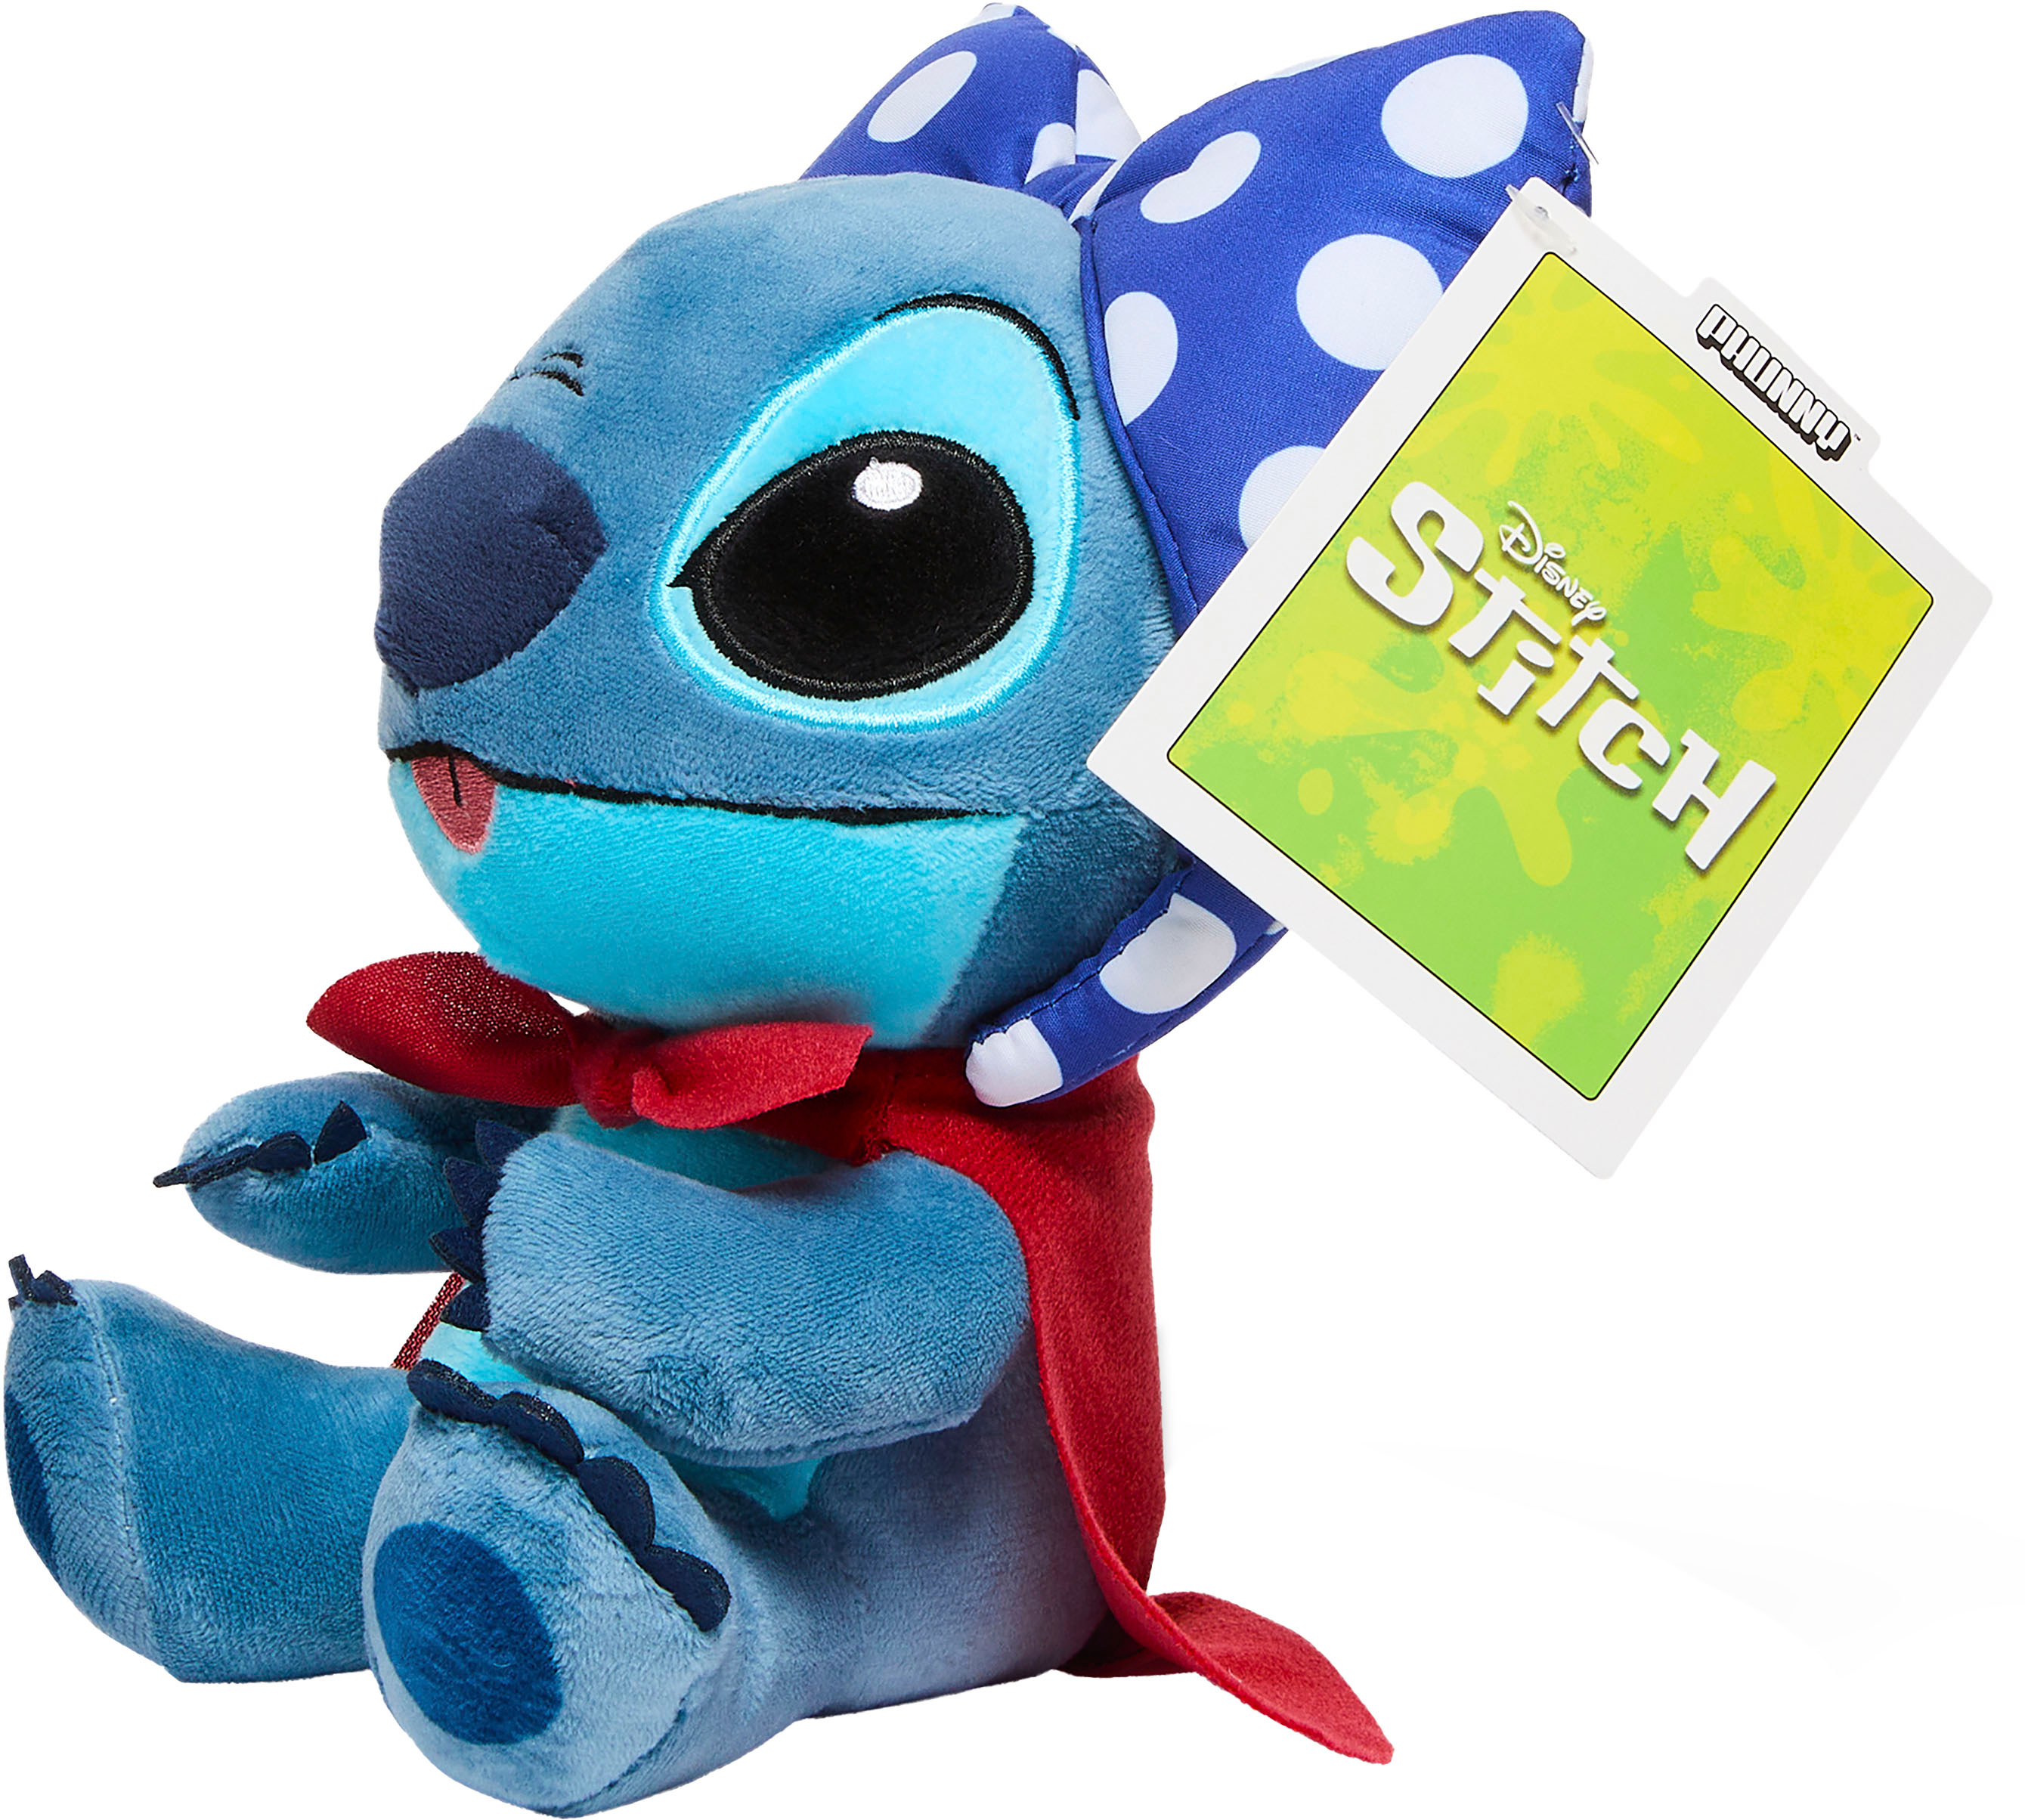 Plush Stuffed Stitch Doll Disney Store Exclusive Curly Hair toy